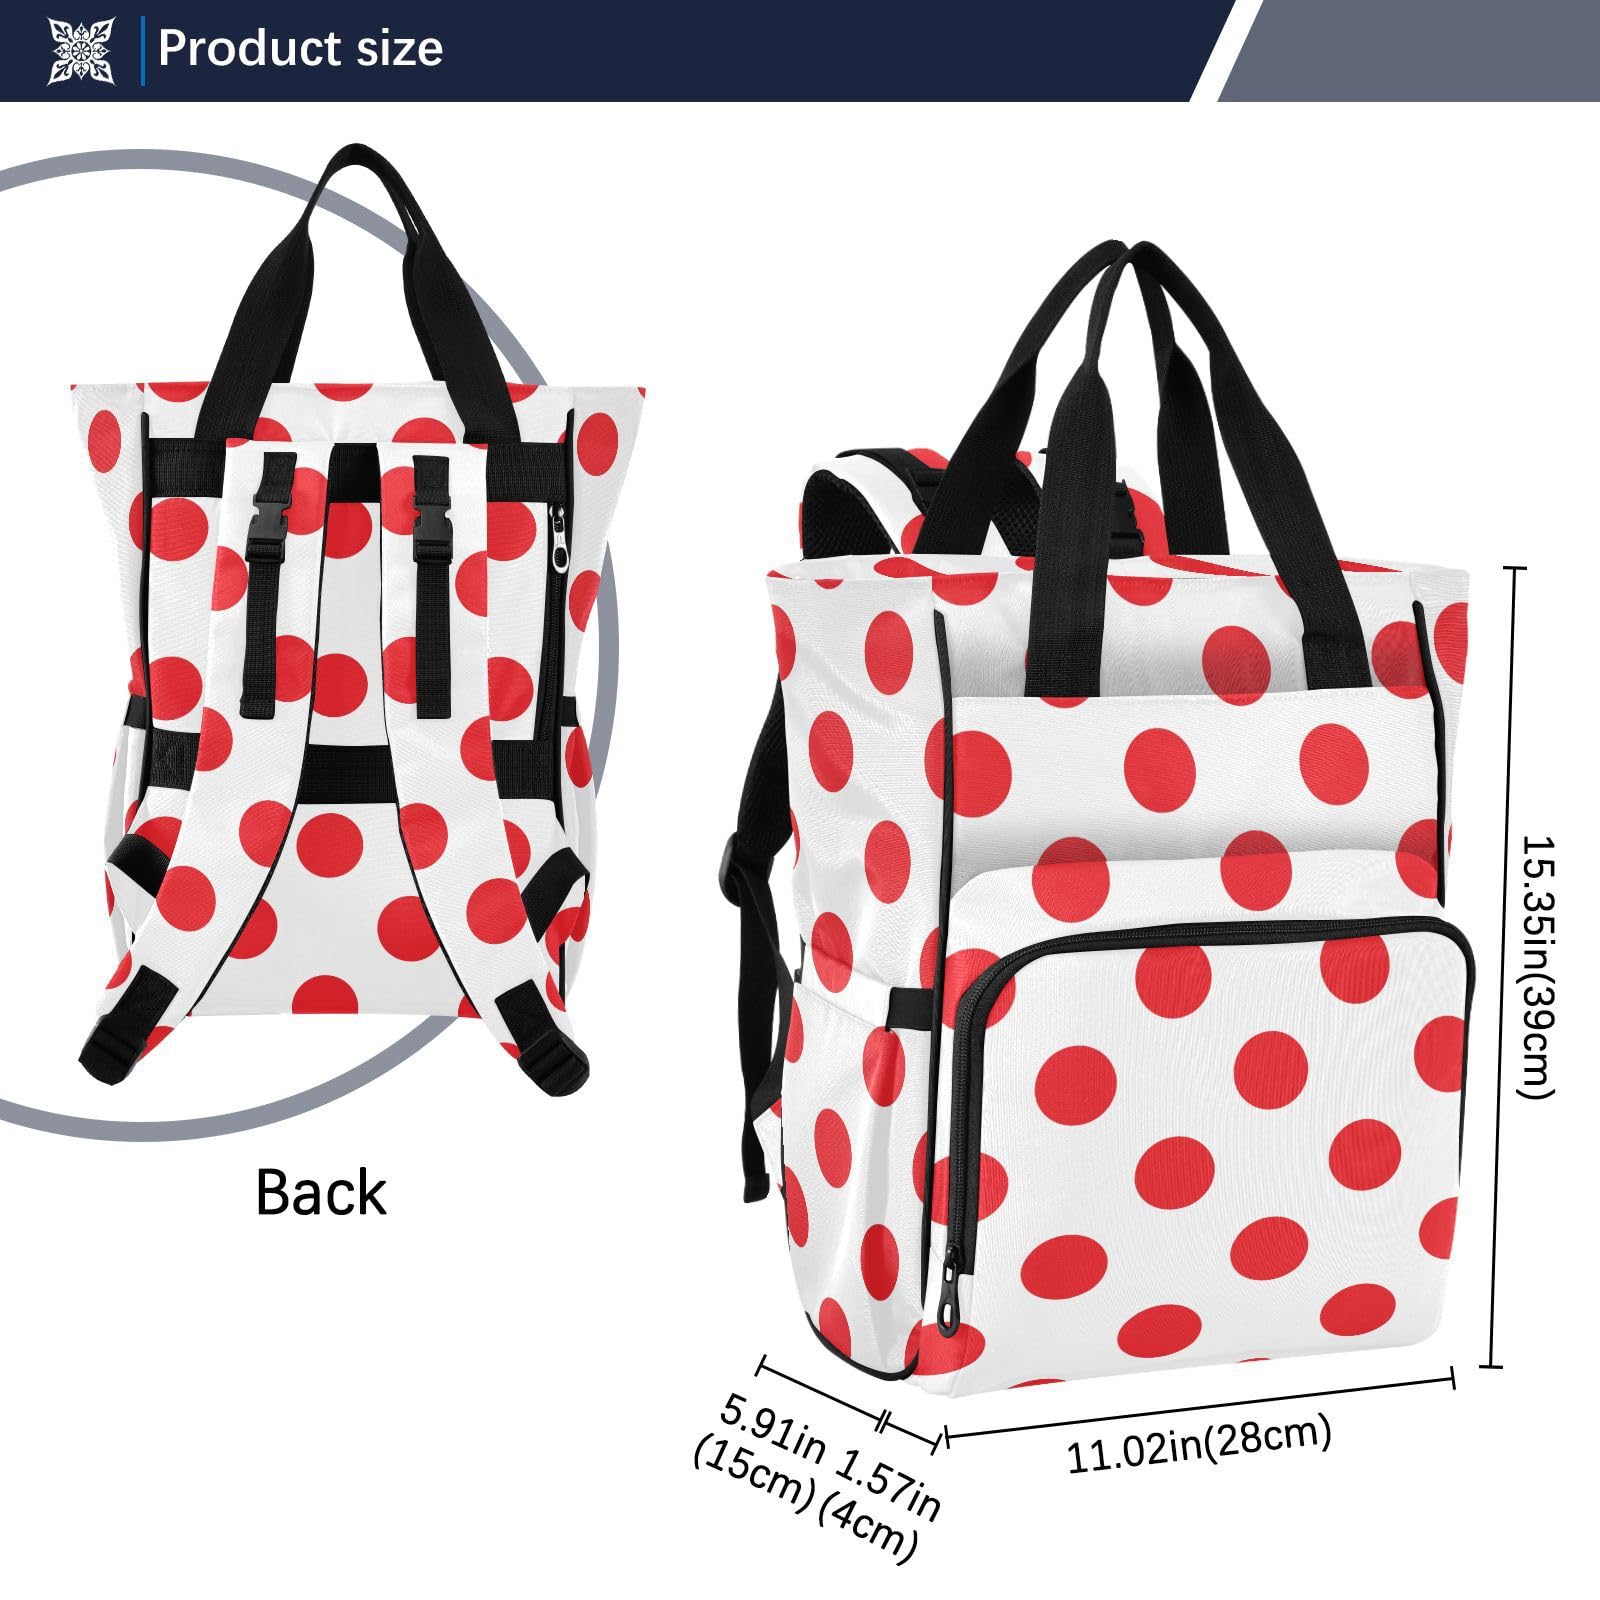 innewgogo Polka Dot Red White Diaper Bag Backpack for Dad Mom Large Capacity Baby Changing Totes with Three Pockets Multifunction Maternity Travel Bag for Playing Shopping Picnicking